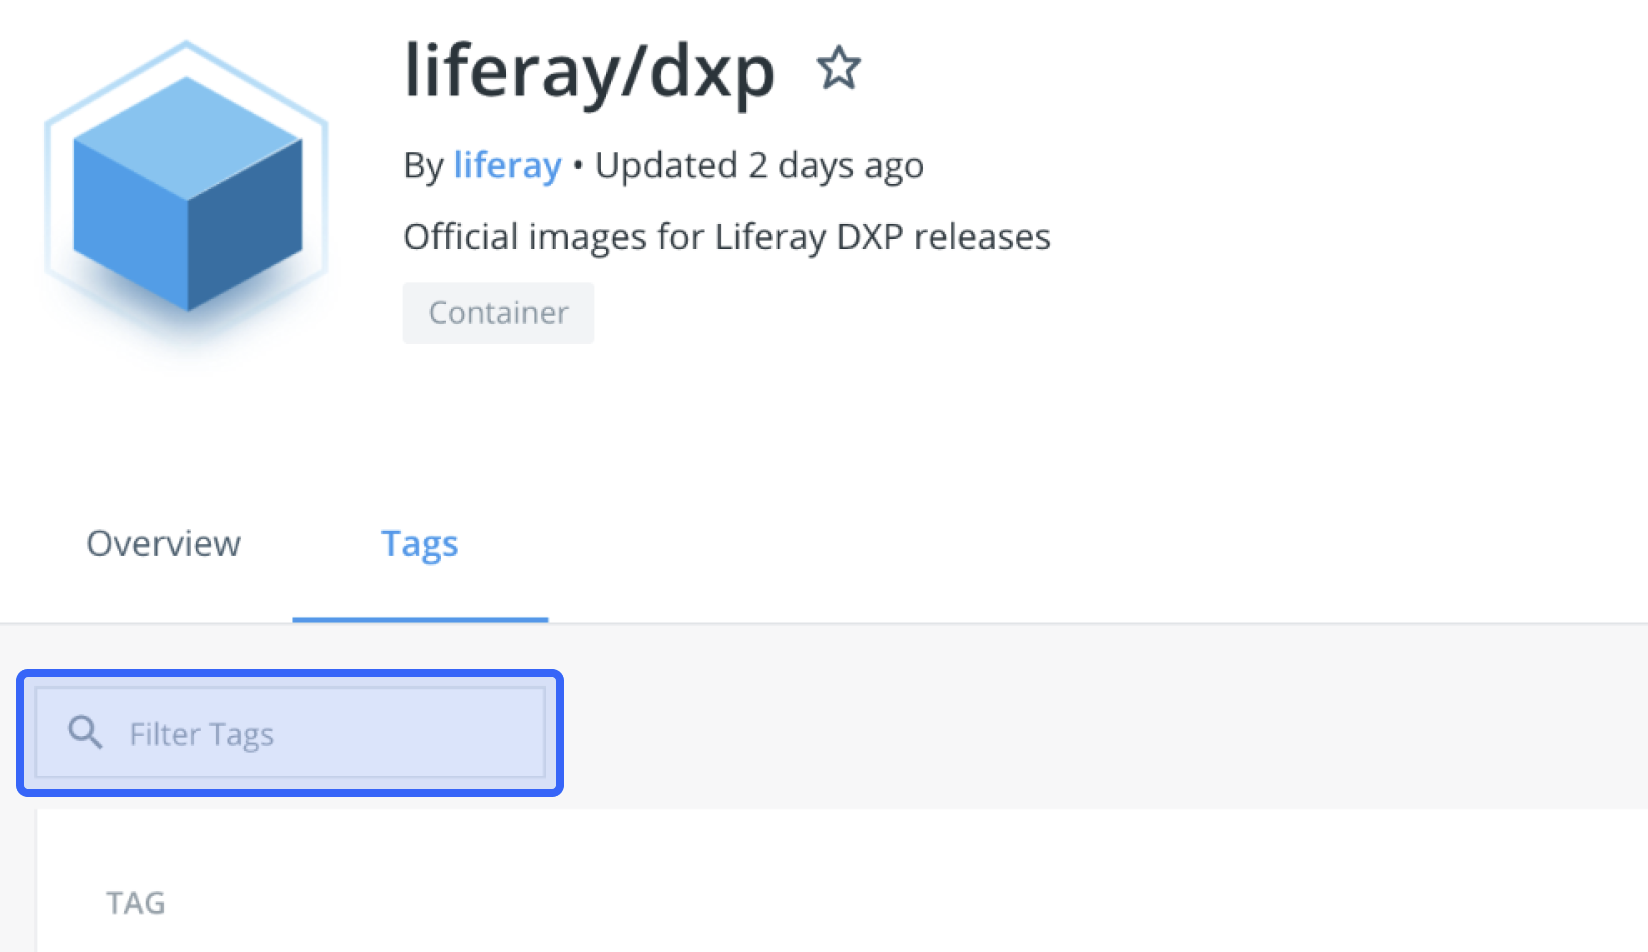 Use the Filter Tags field to narrow down the list of Liferay DXP images to the major version you are looking for.